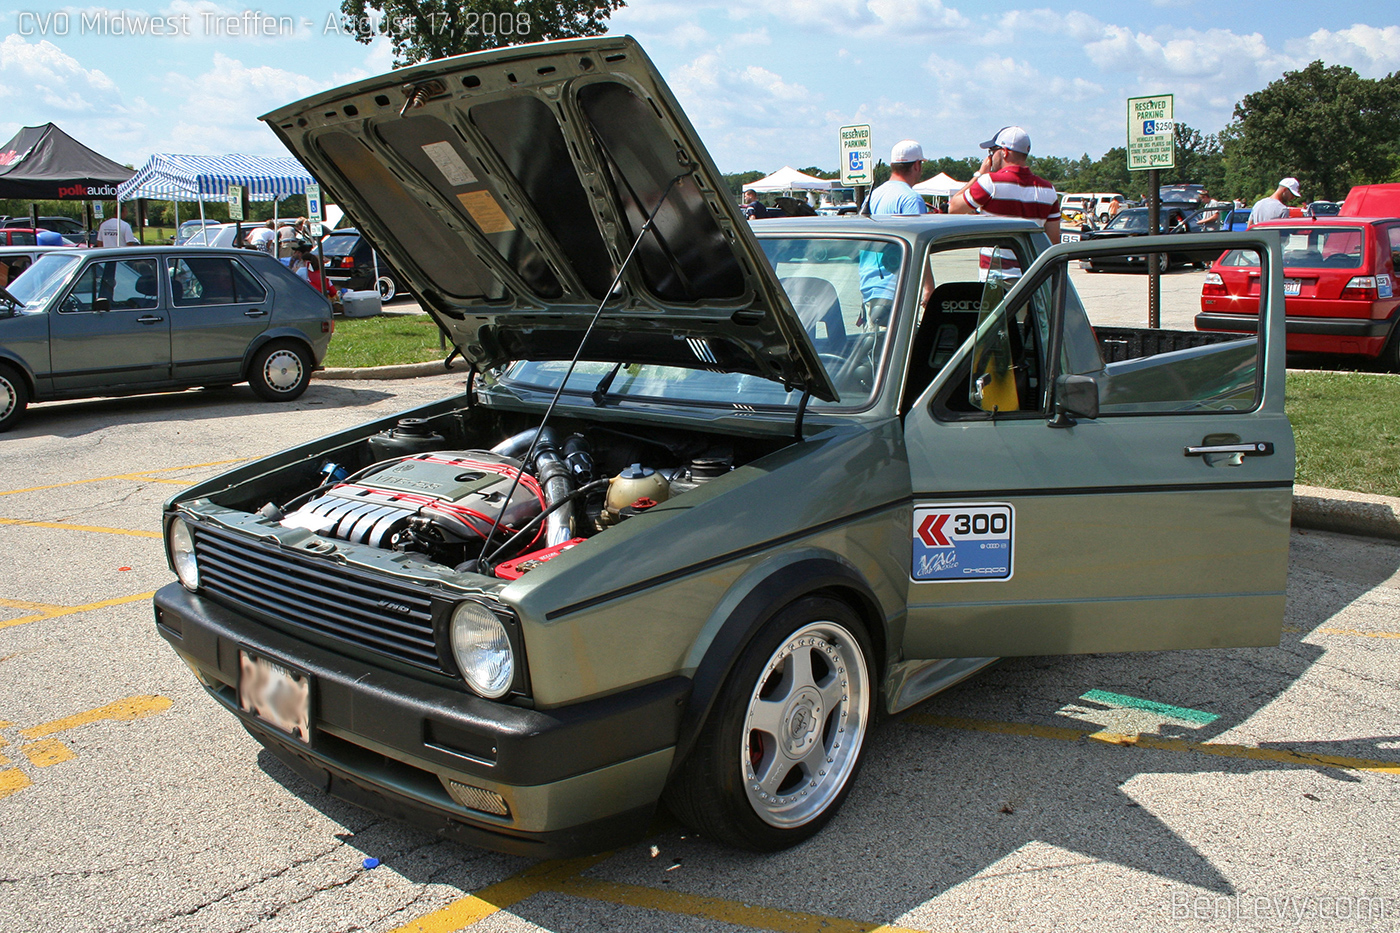 VW Caddy with VR6